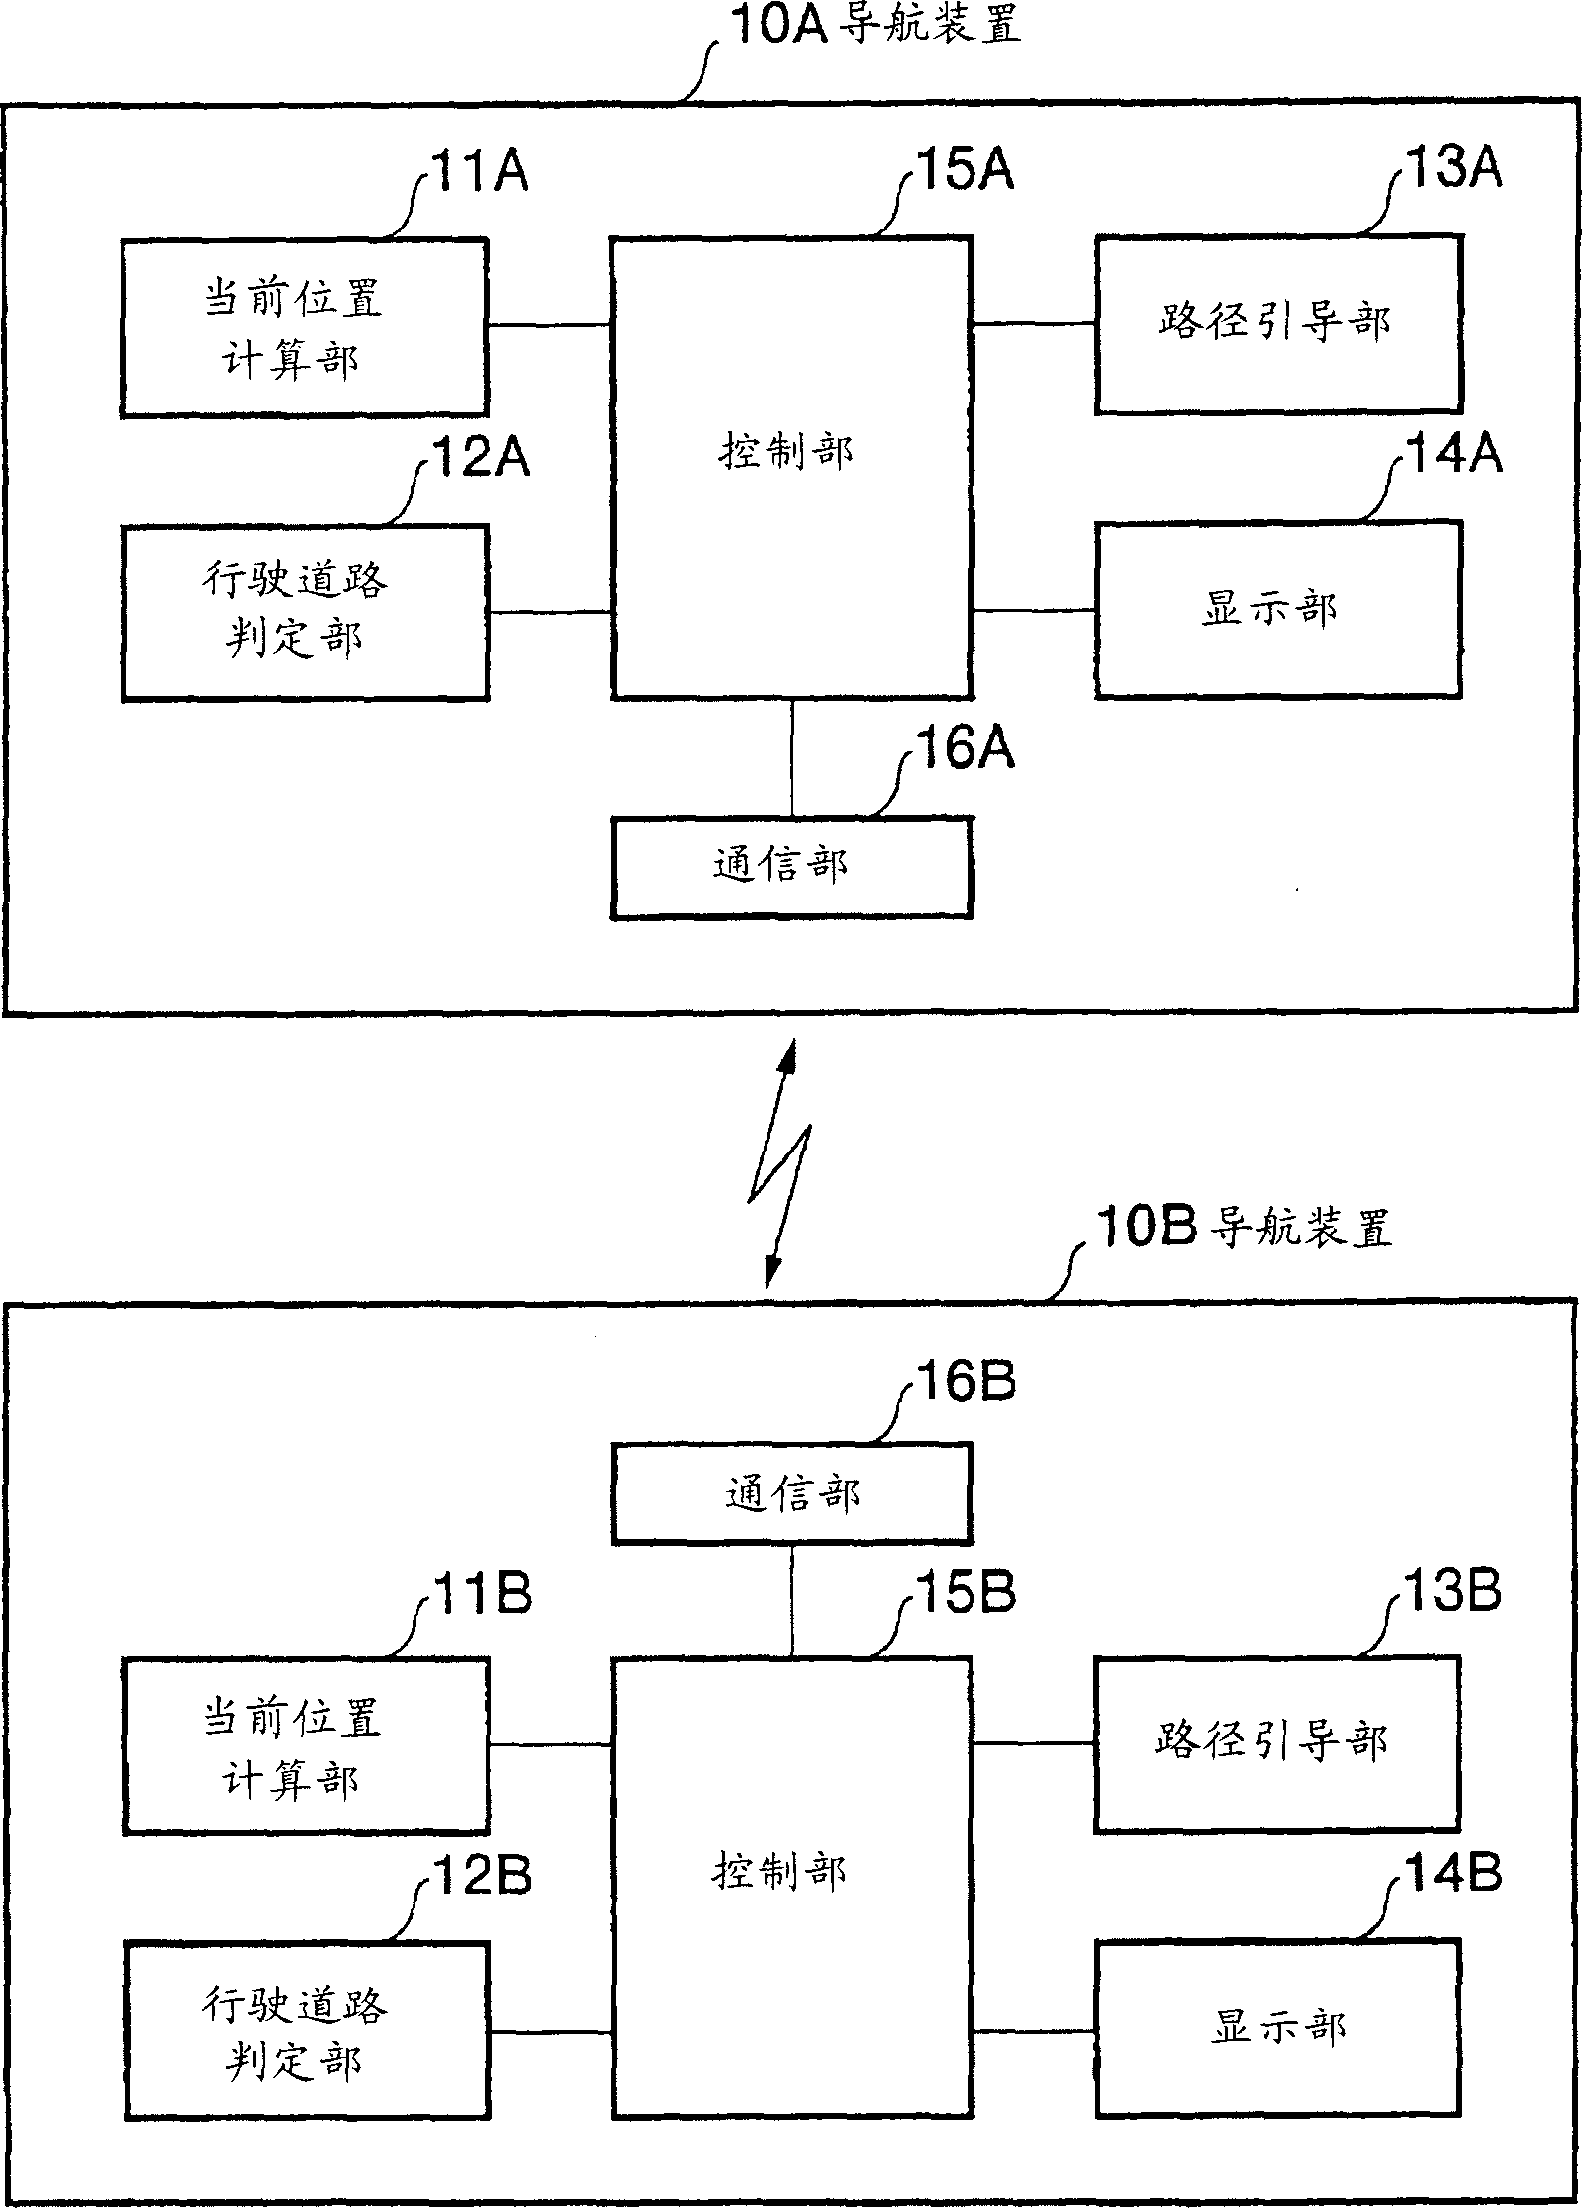 Navigation device and approach information display method